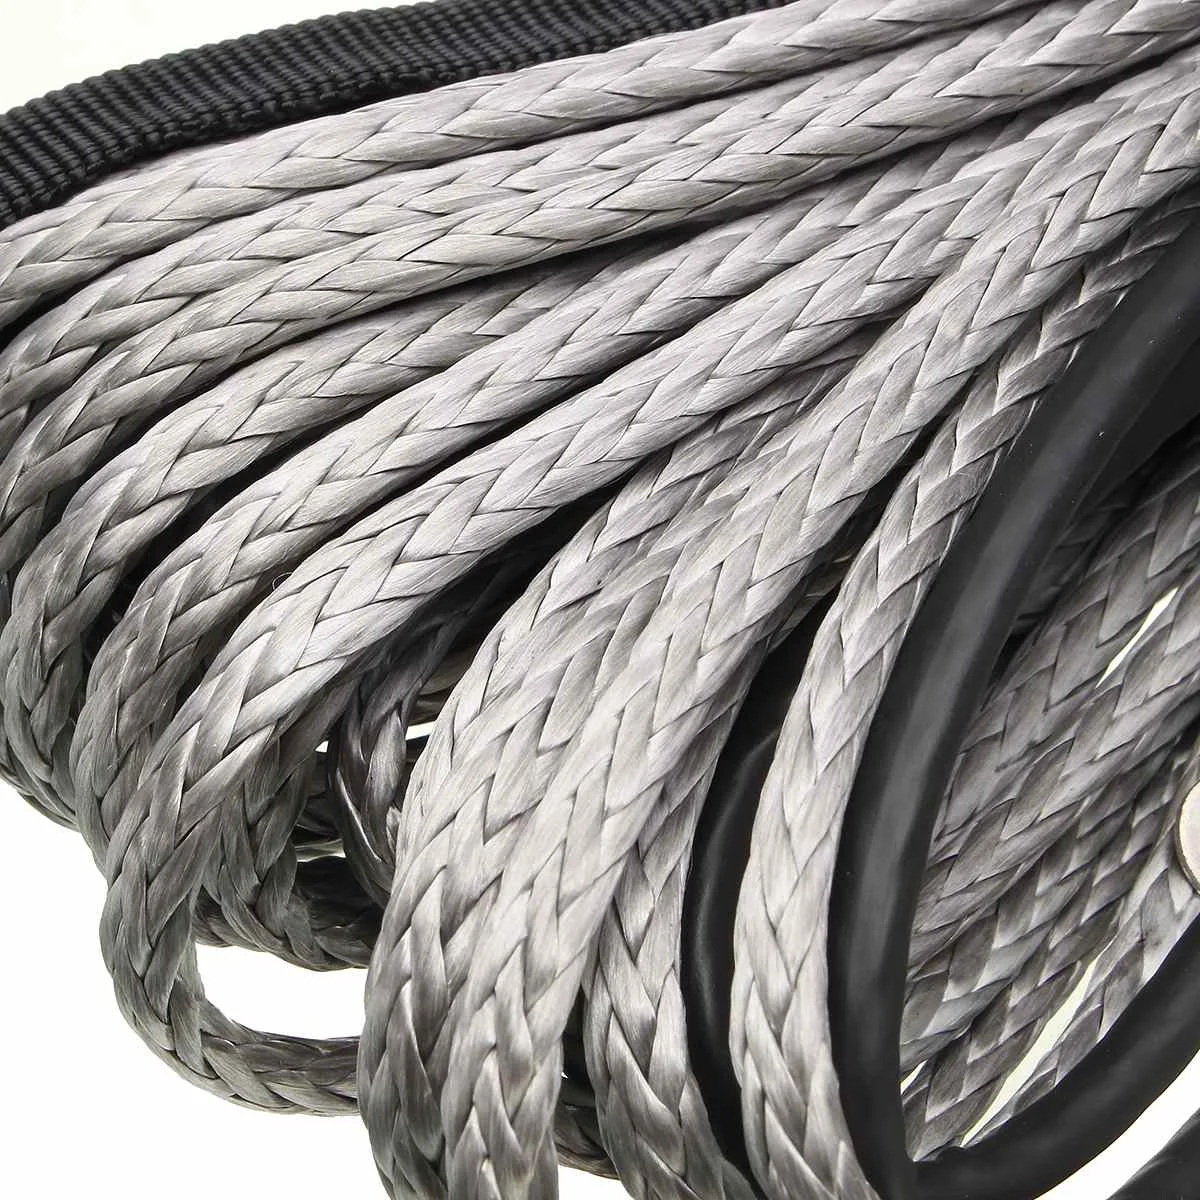 NEW 15m 7700 lbs Winch Rope String Line Cable With Sheath Synthetic Towing Rope Car Wash Maintenance String for ATV UTV Off-Road